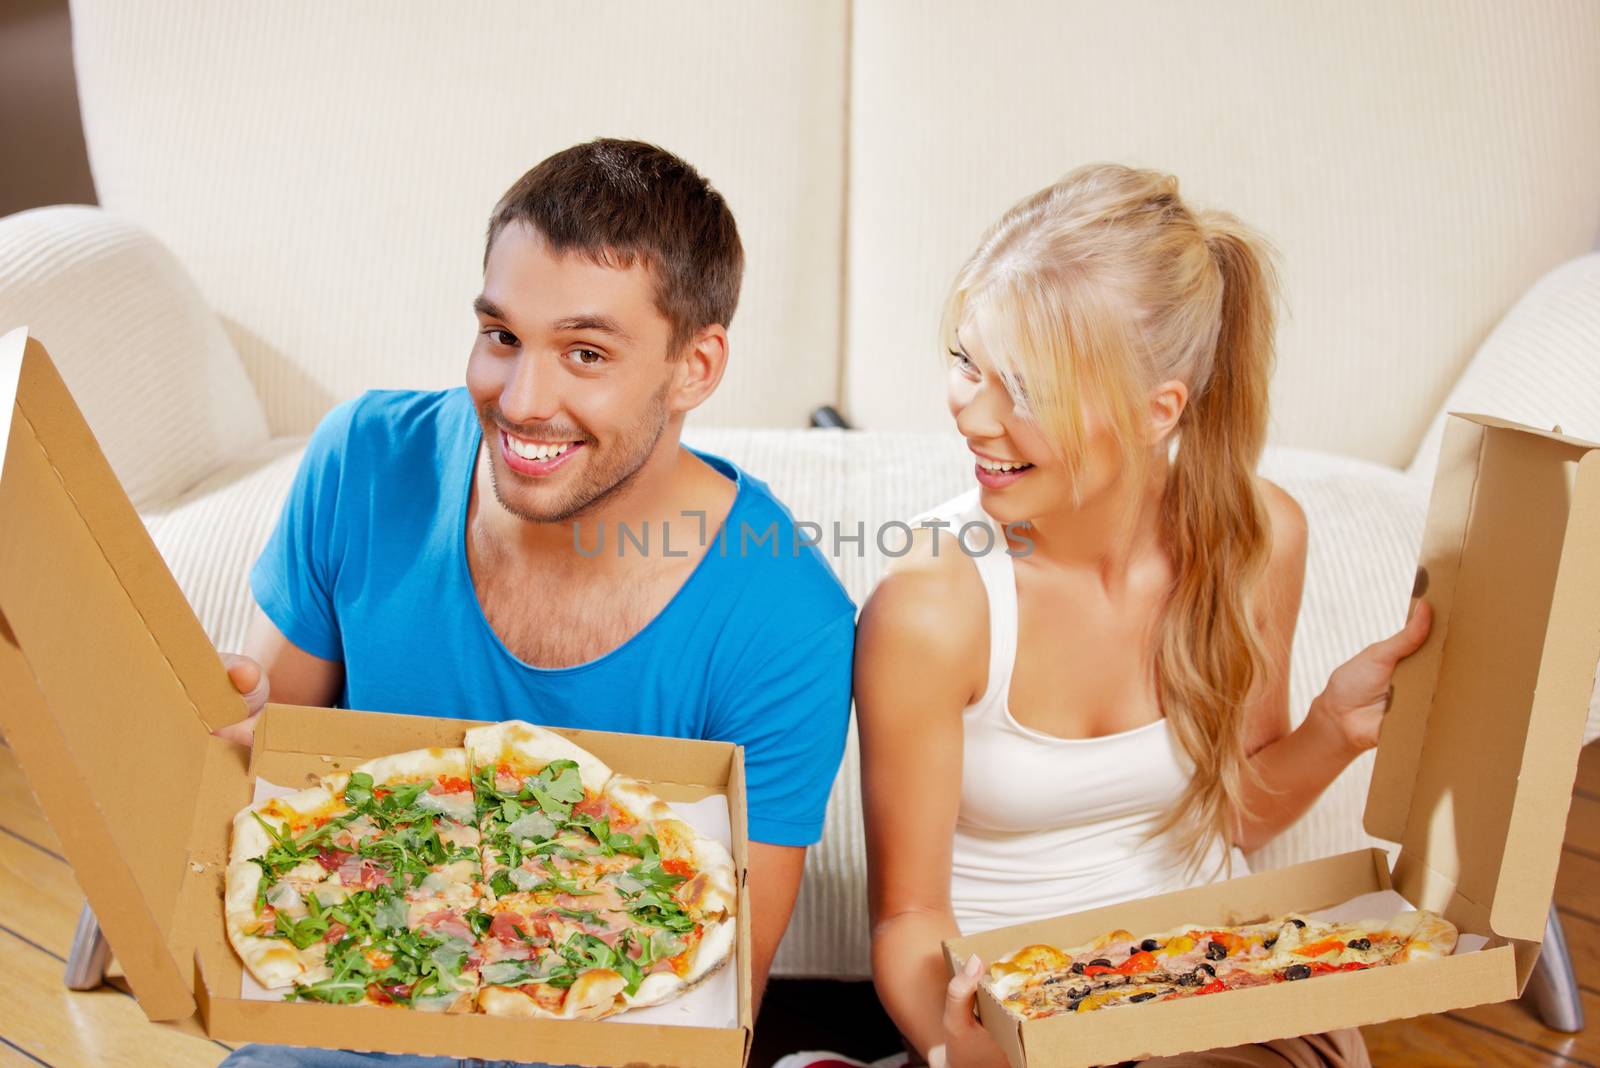 picture of happy romantic couple eating pizza at home (focus on man)